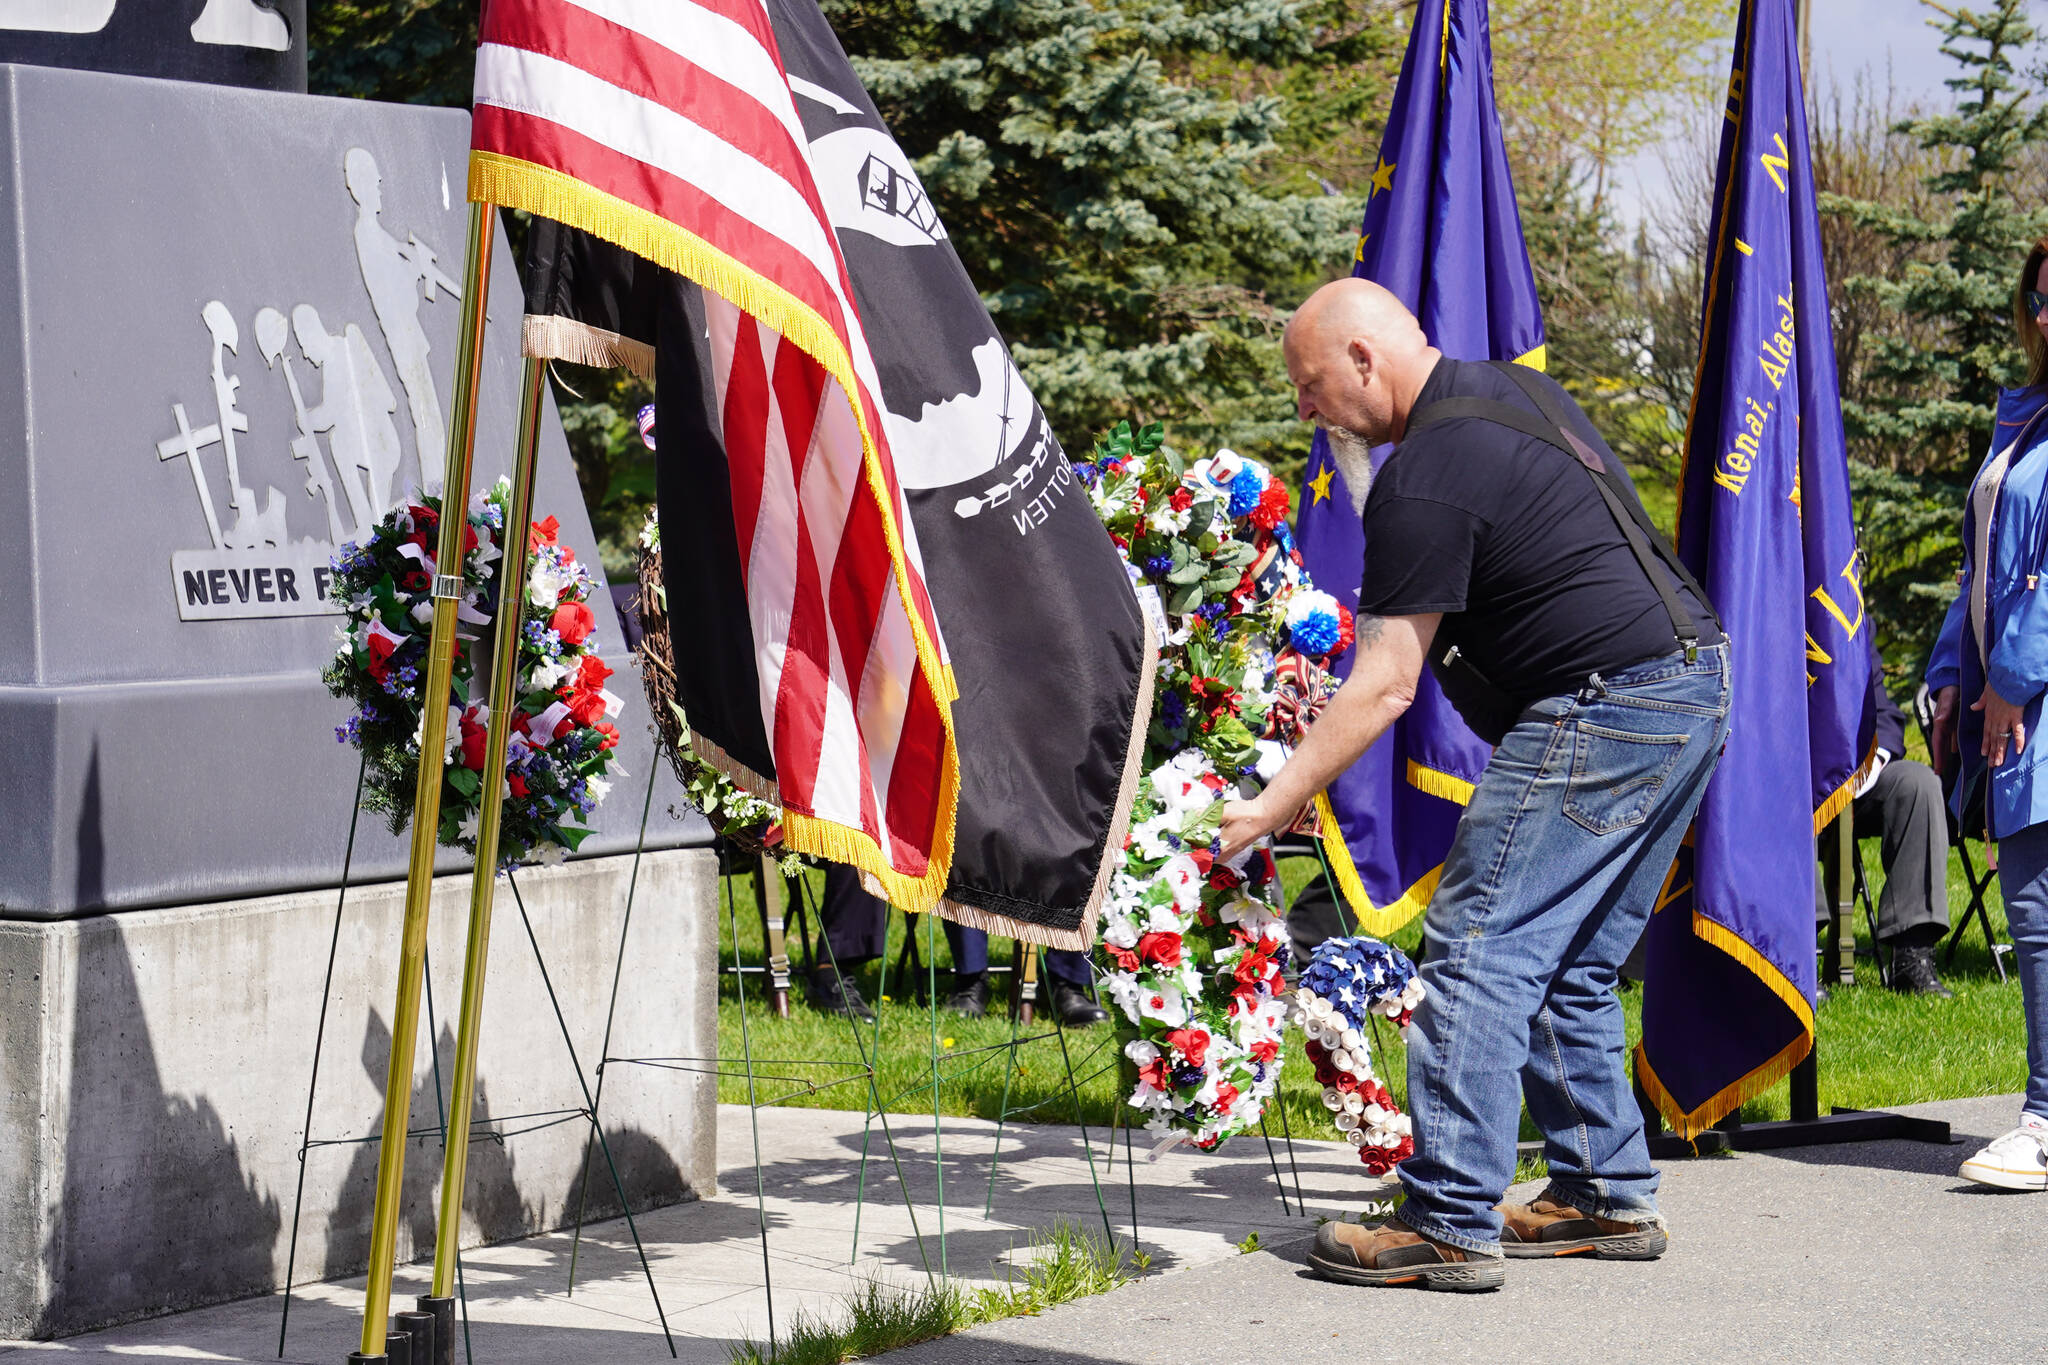 Wreaths are placed honoring fallen soldiers during a Memorial Day ceremony on Monday, May 29, 2023, at Leif Hanson Memorial Park in Kenai, Alaska. (Jake Dye/Peninsula Clarion)